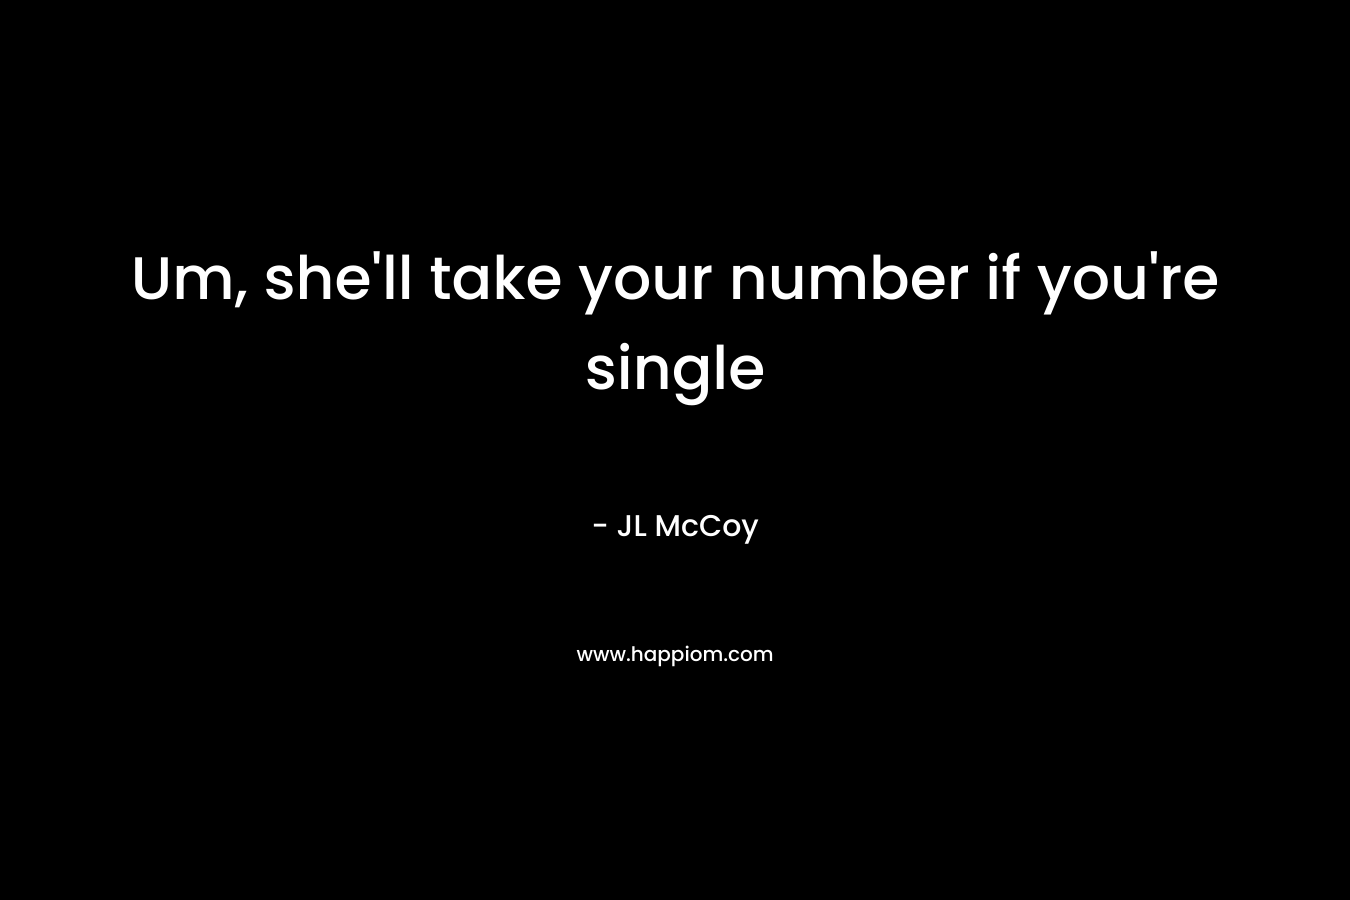 Um, she’ll take your number if you’re single – JL McCoy